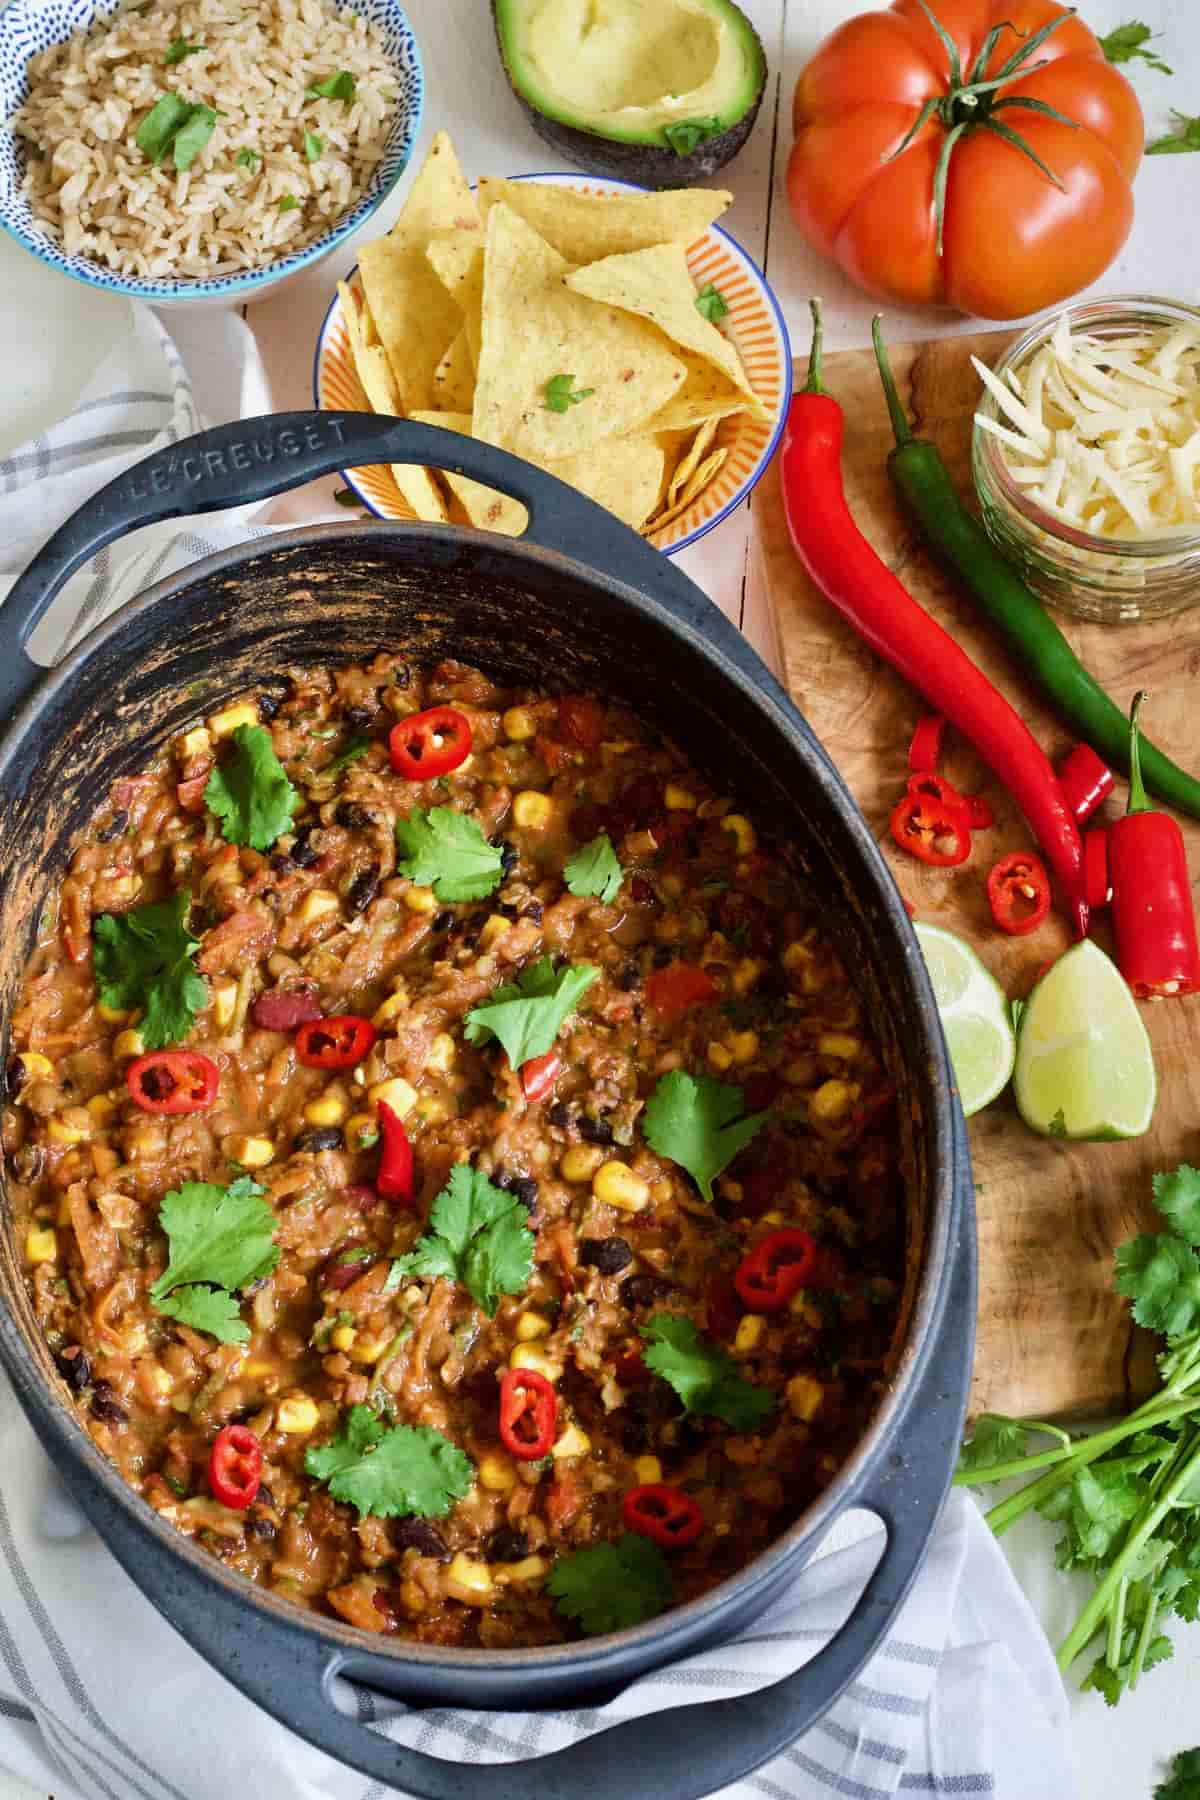 Large pot with chilli and toppings.